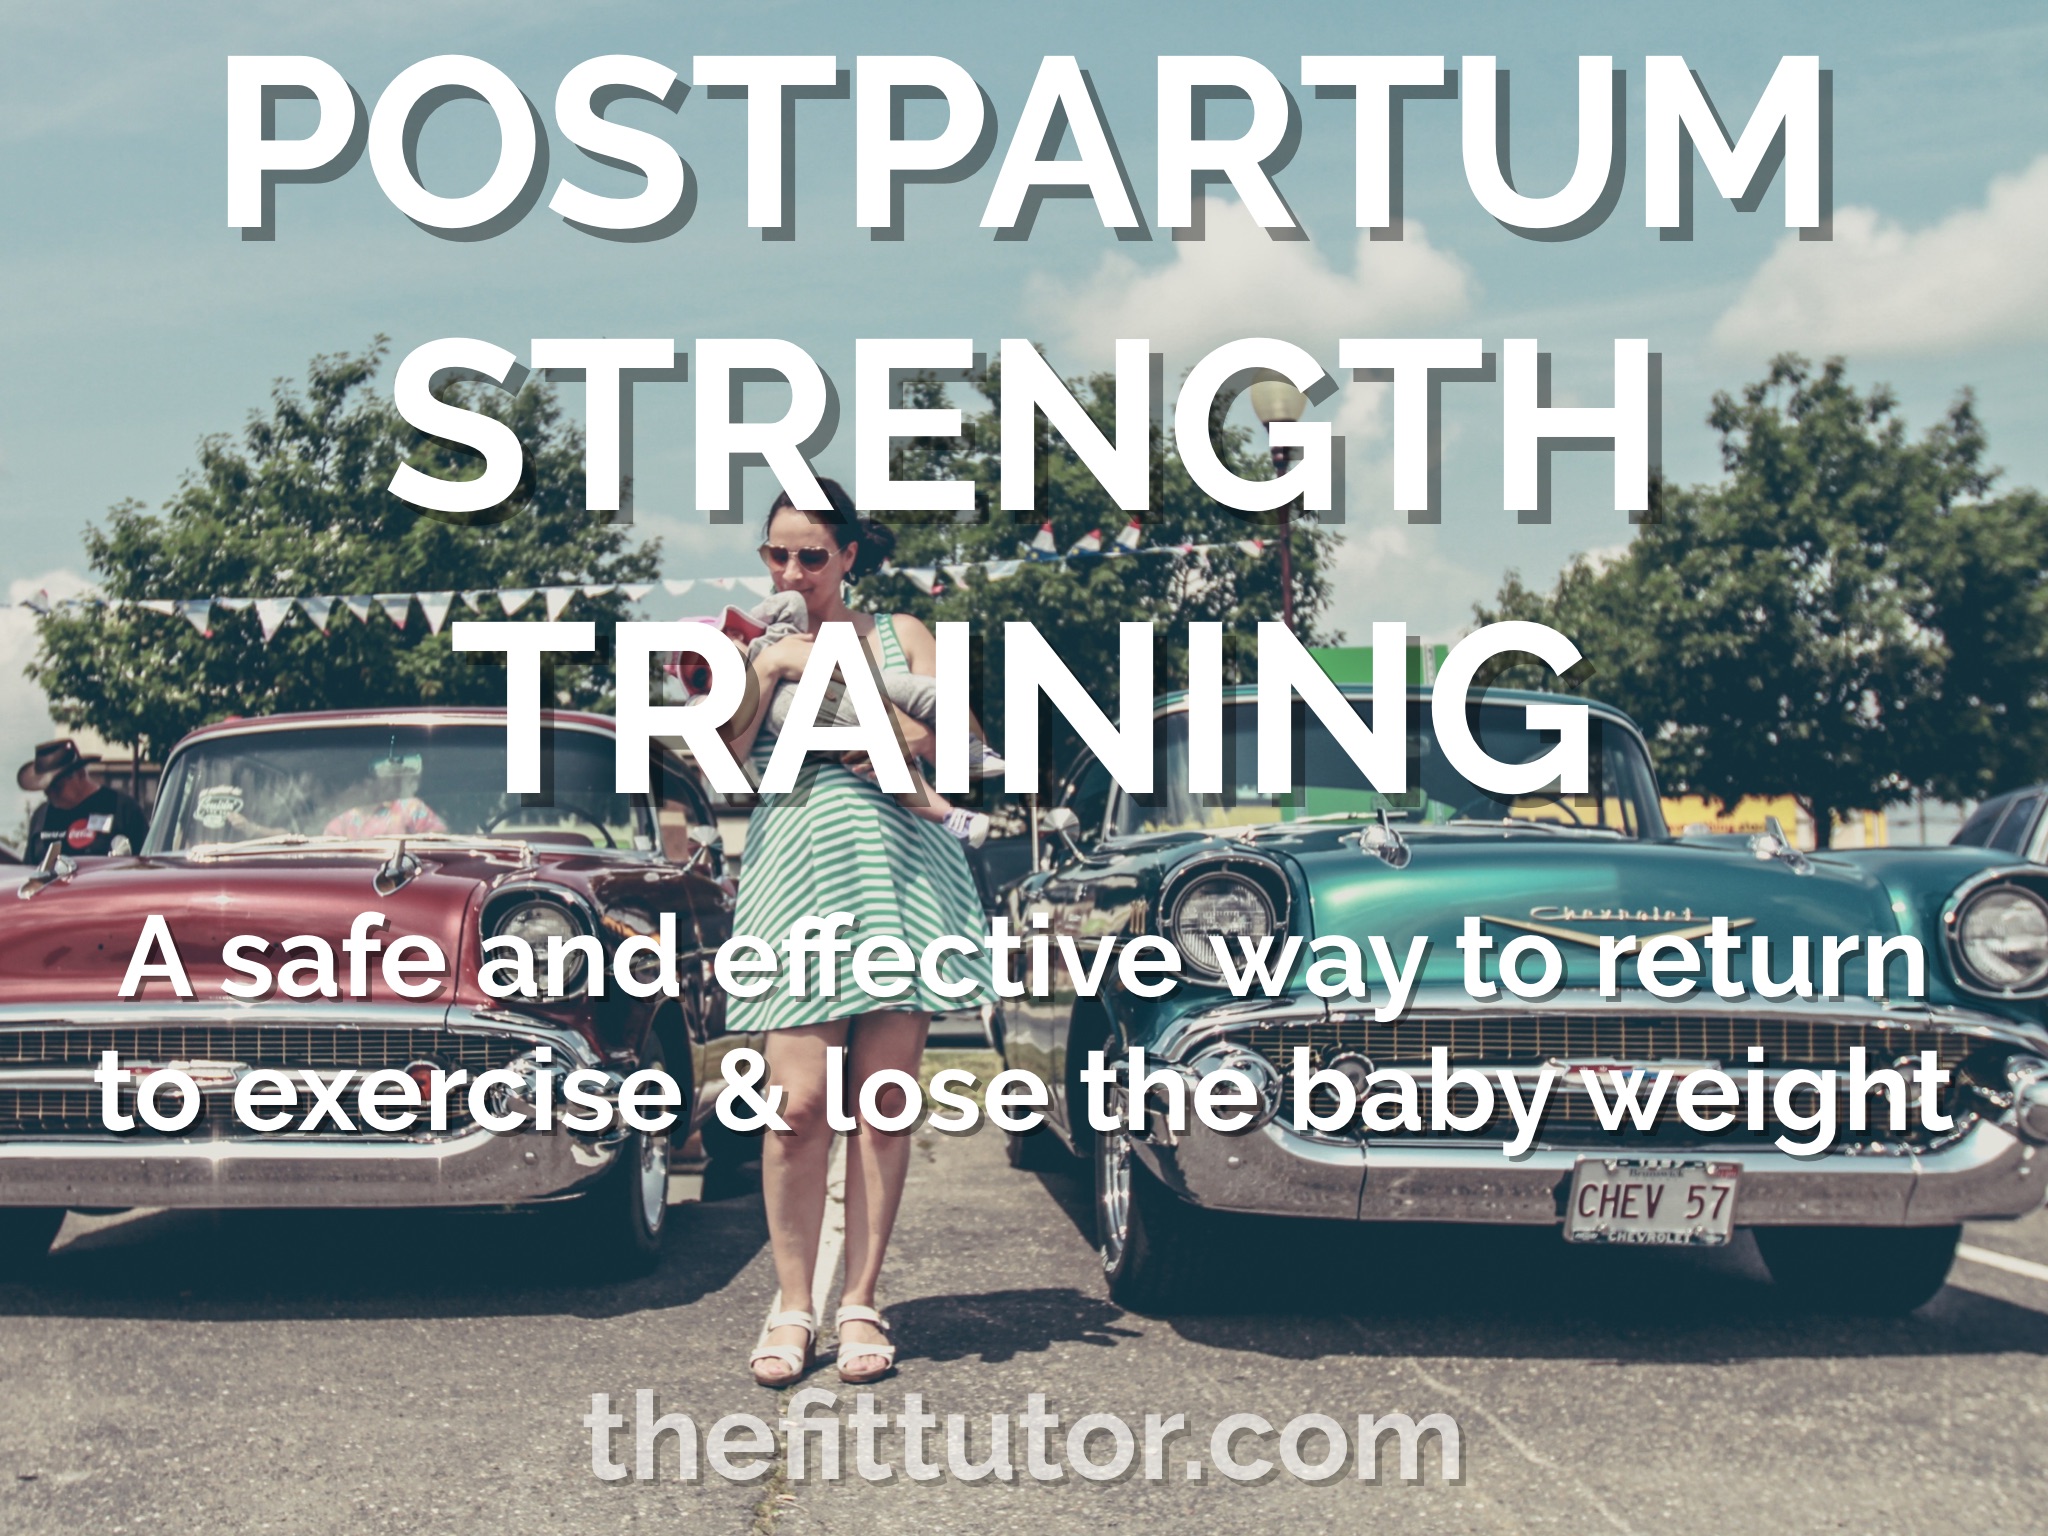 postpartum strength training - get back in shape with this healthy and effective program